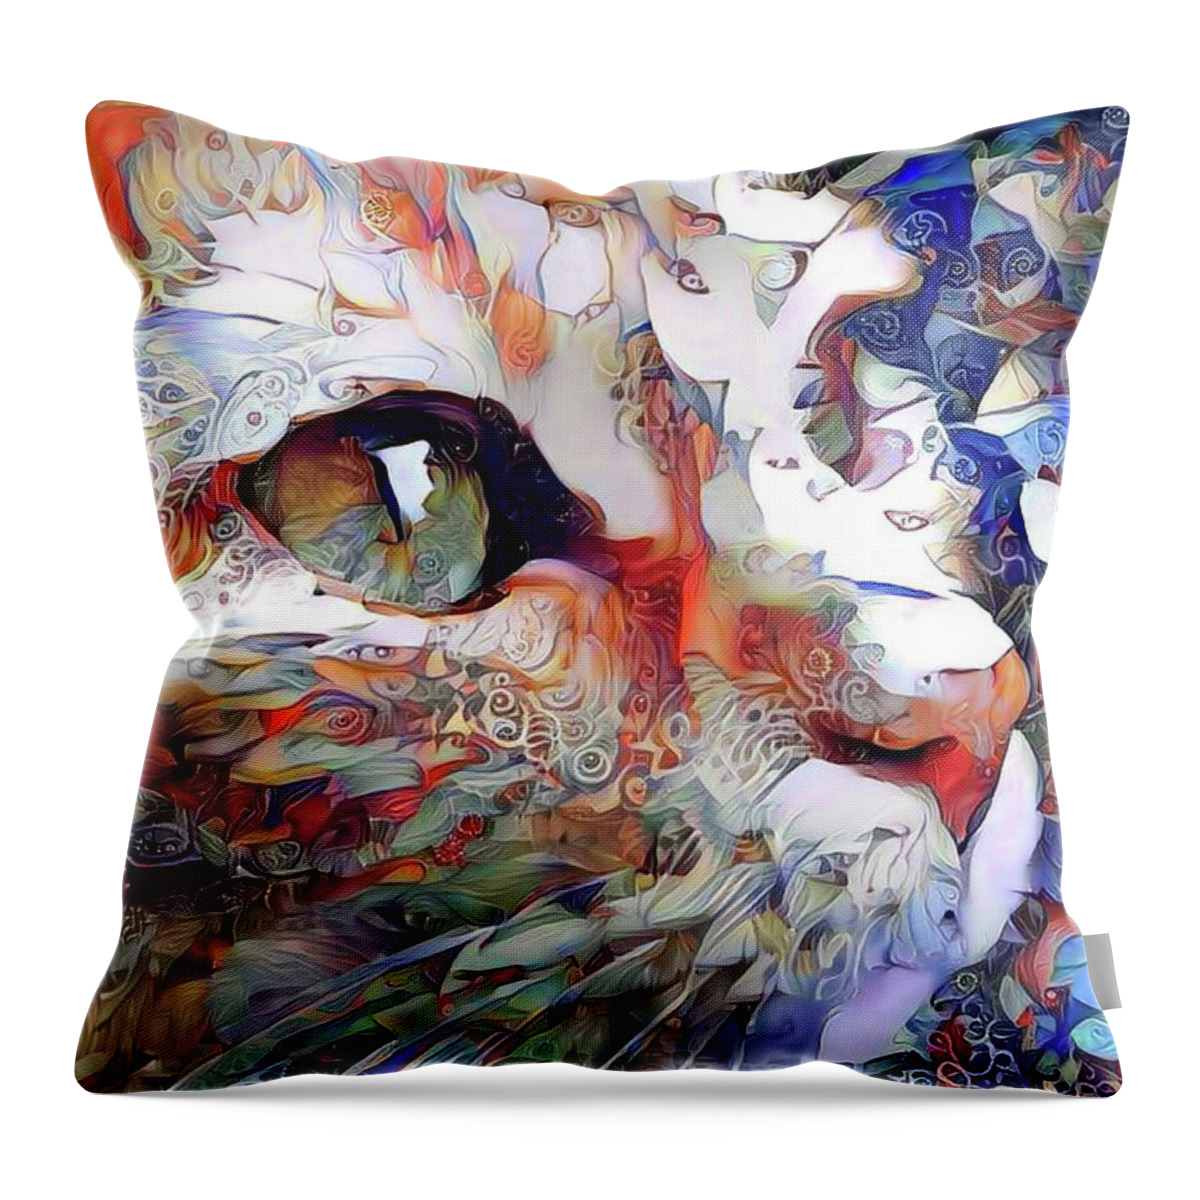 Orange Cat Throw Pillow featuring the digital art Colorful Orange Cat Art by Peggy Collins